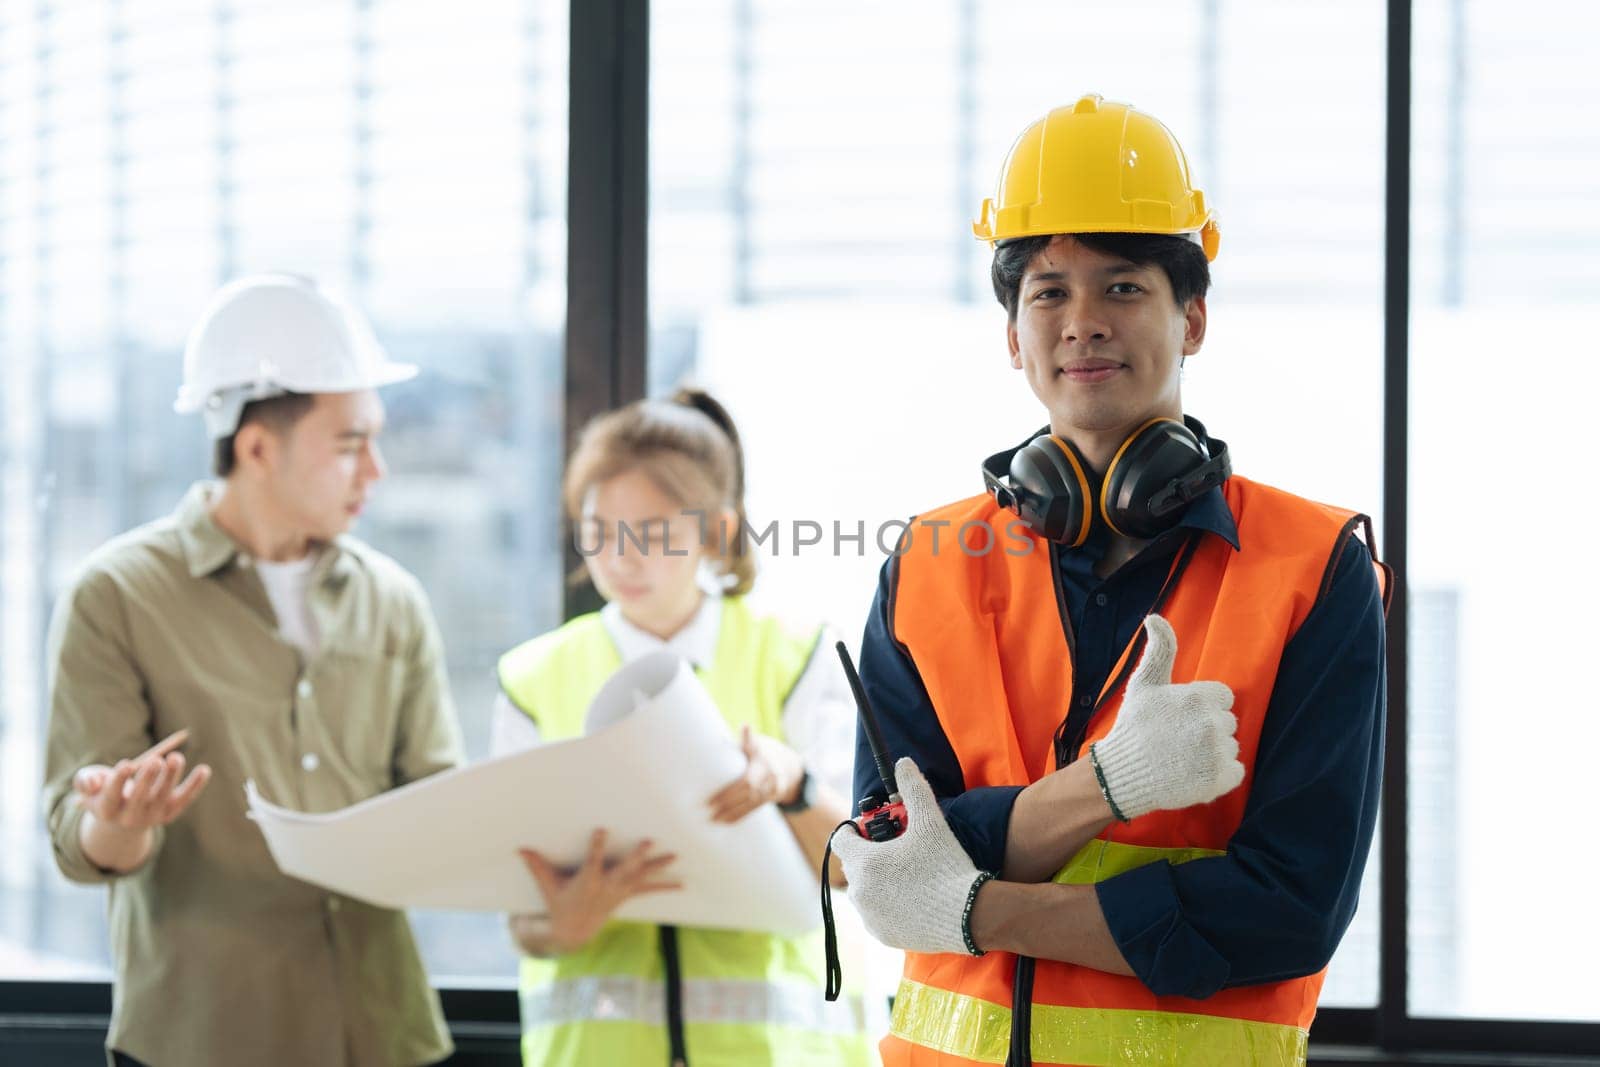 Portrait of civil engineer with hard hat holding radio walkie talkie while supervisor engineers and architect planning in background by itchaznong